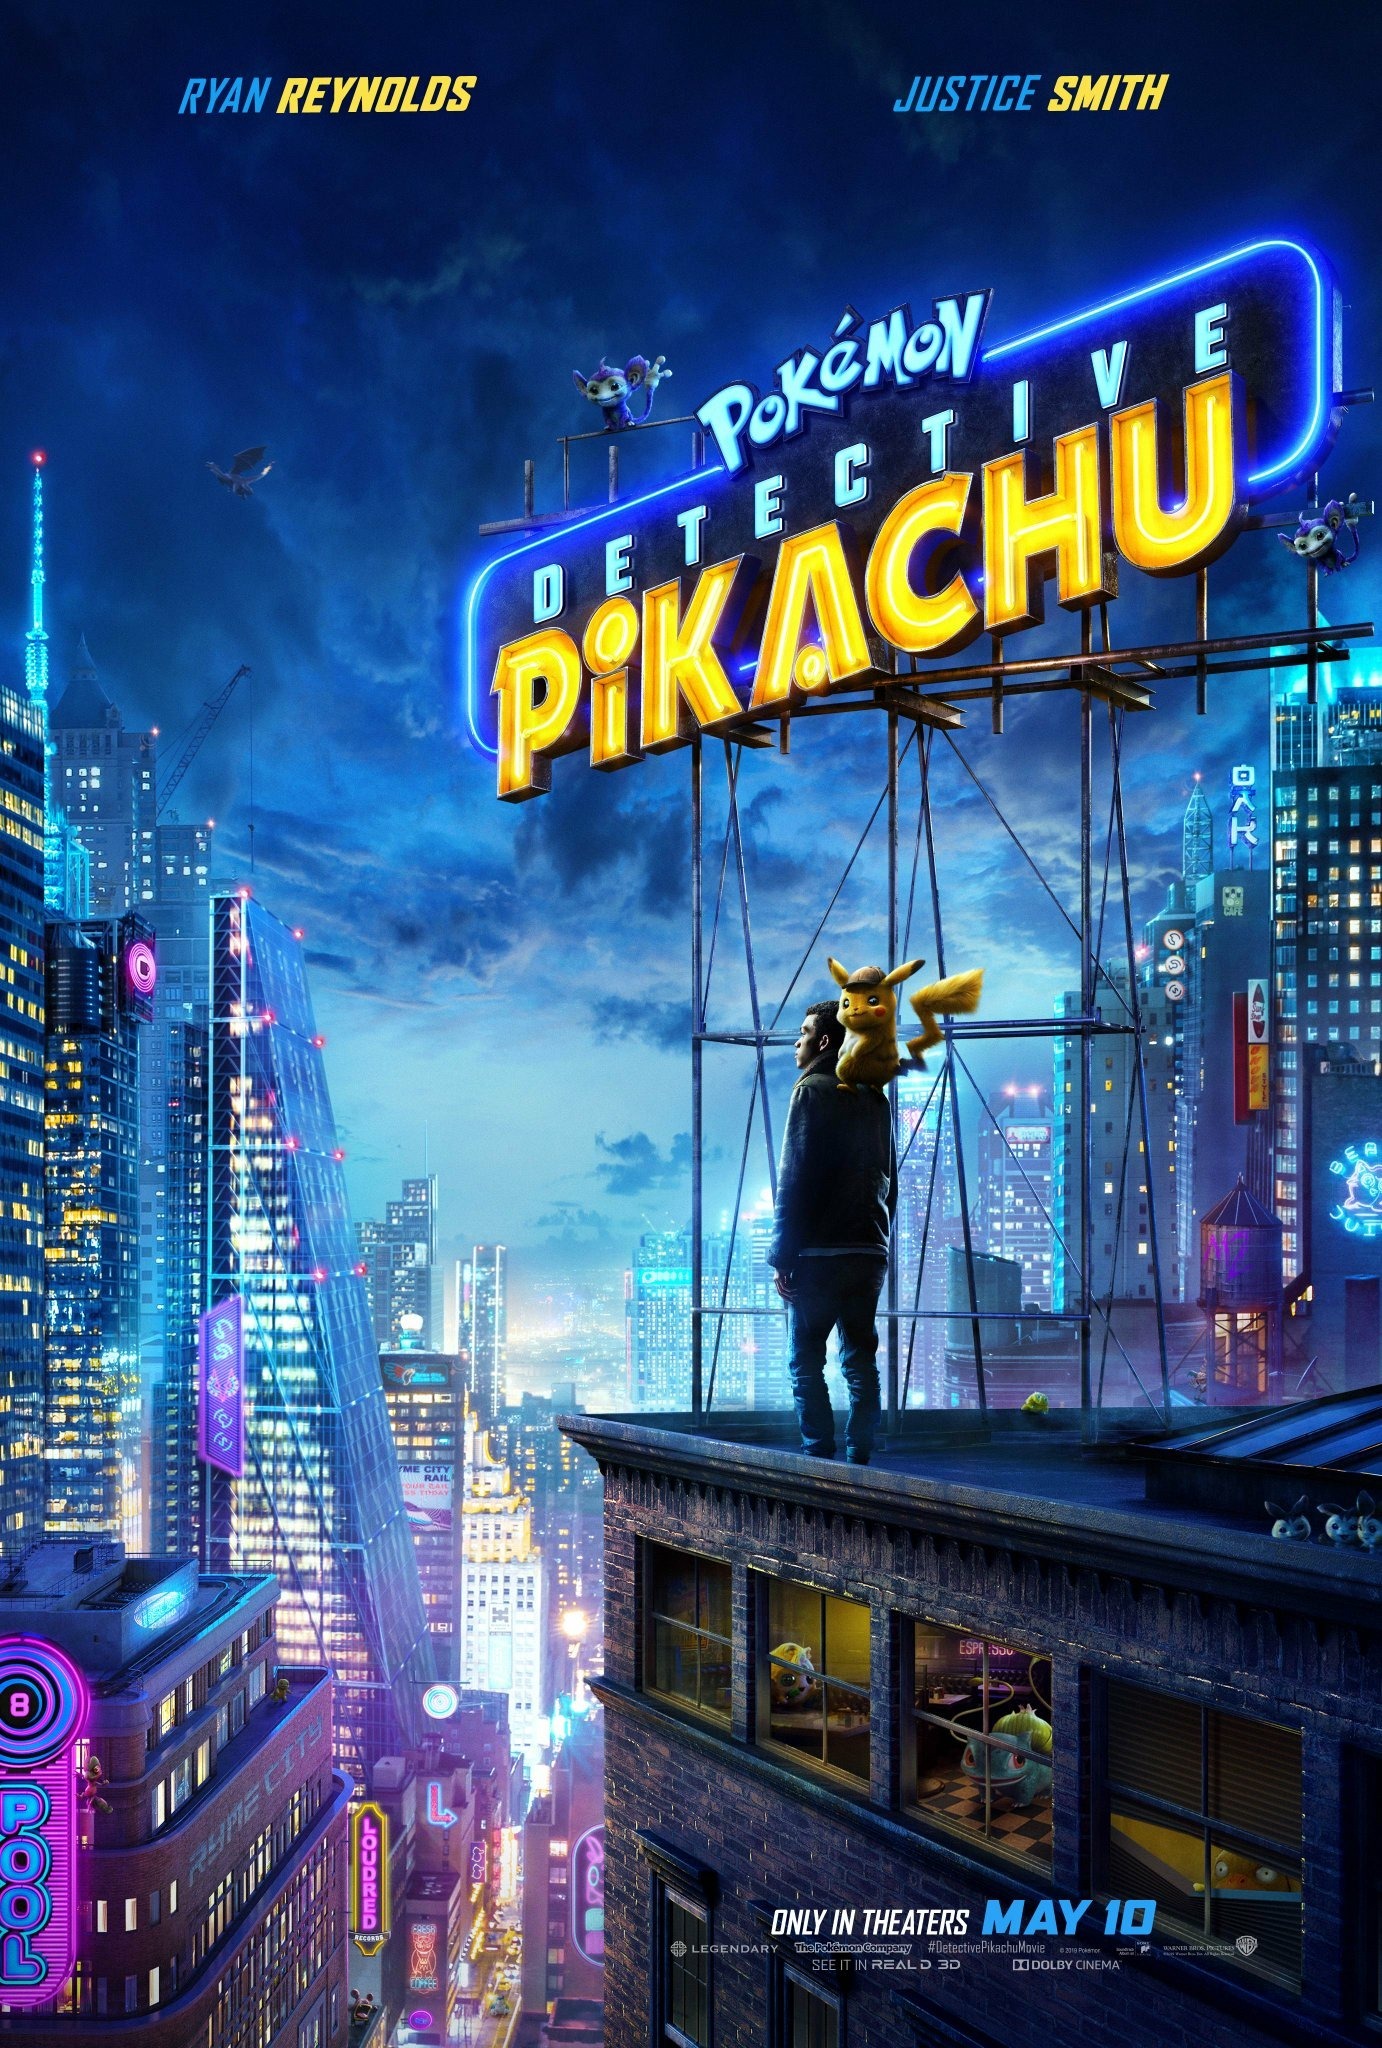 Pokémon Detective Pikachu – Funny With Lots of Twists To Keep You Guessing